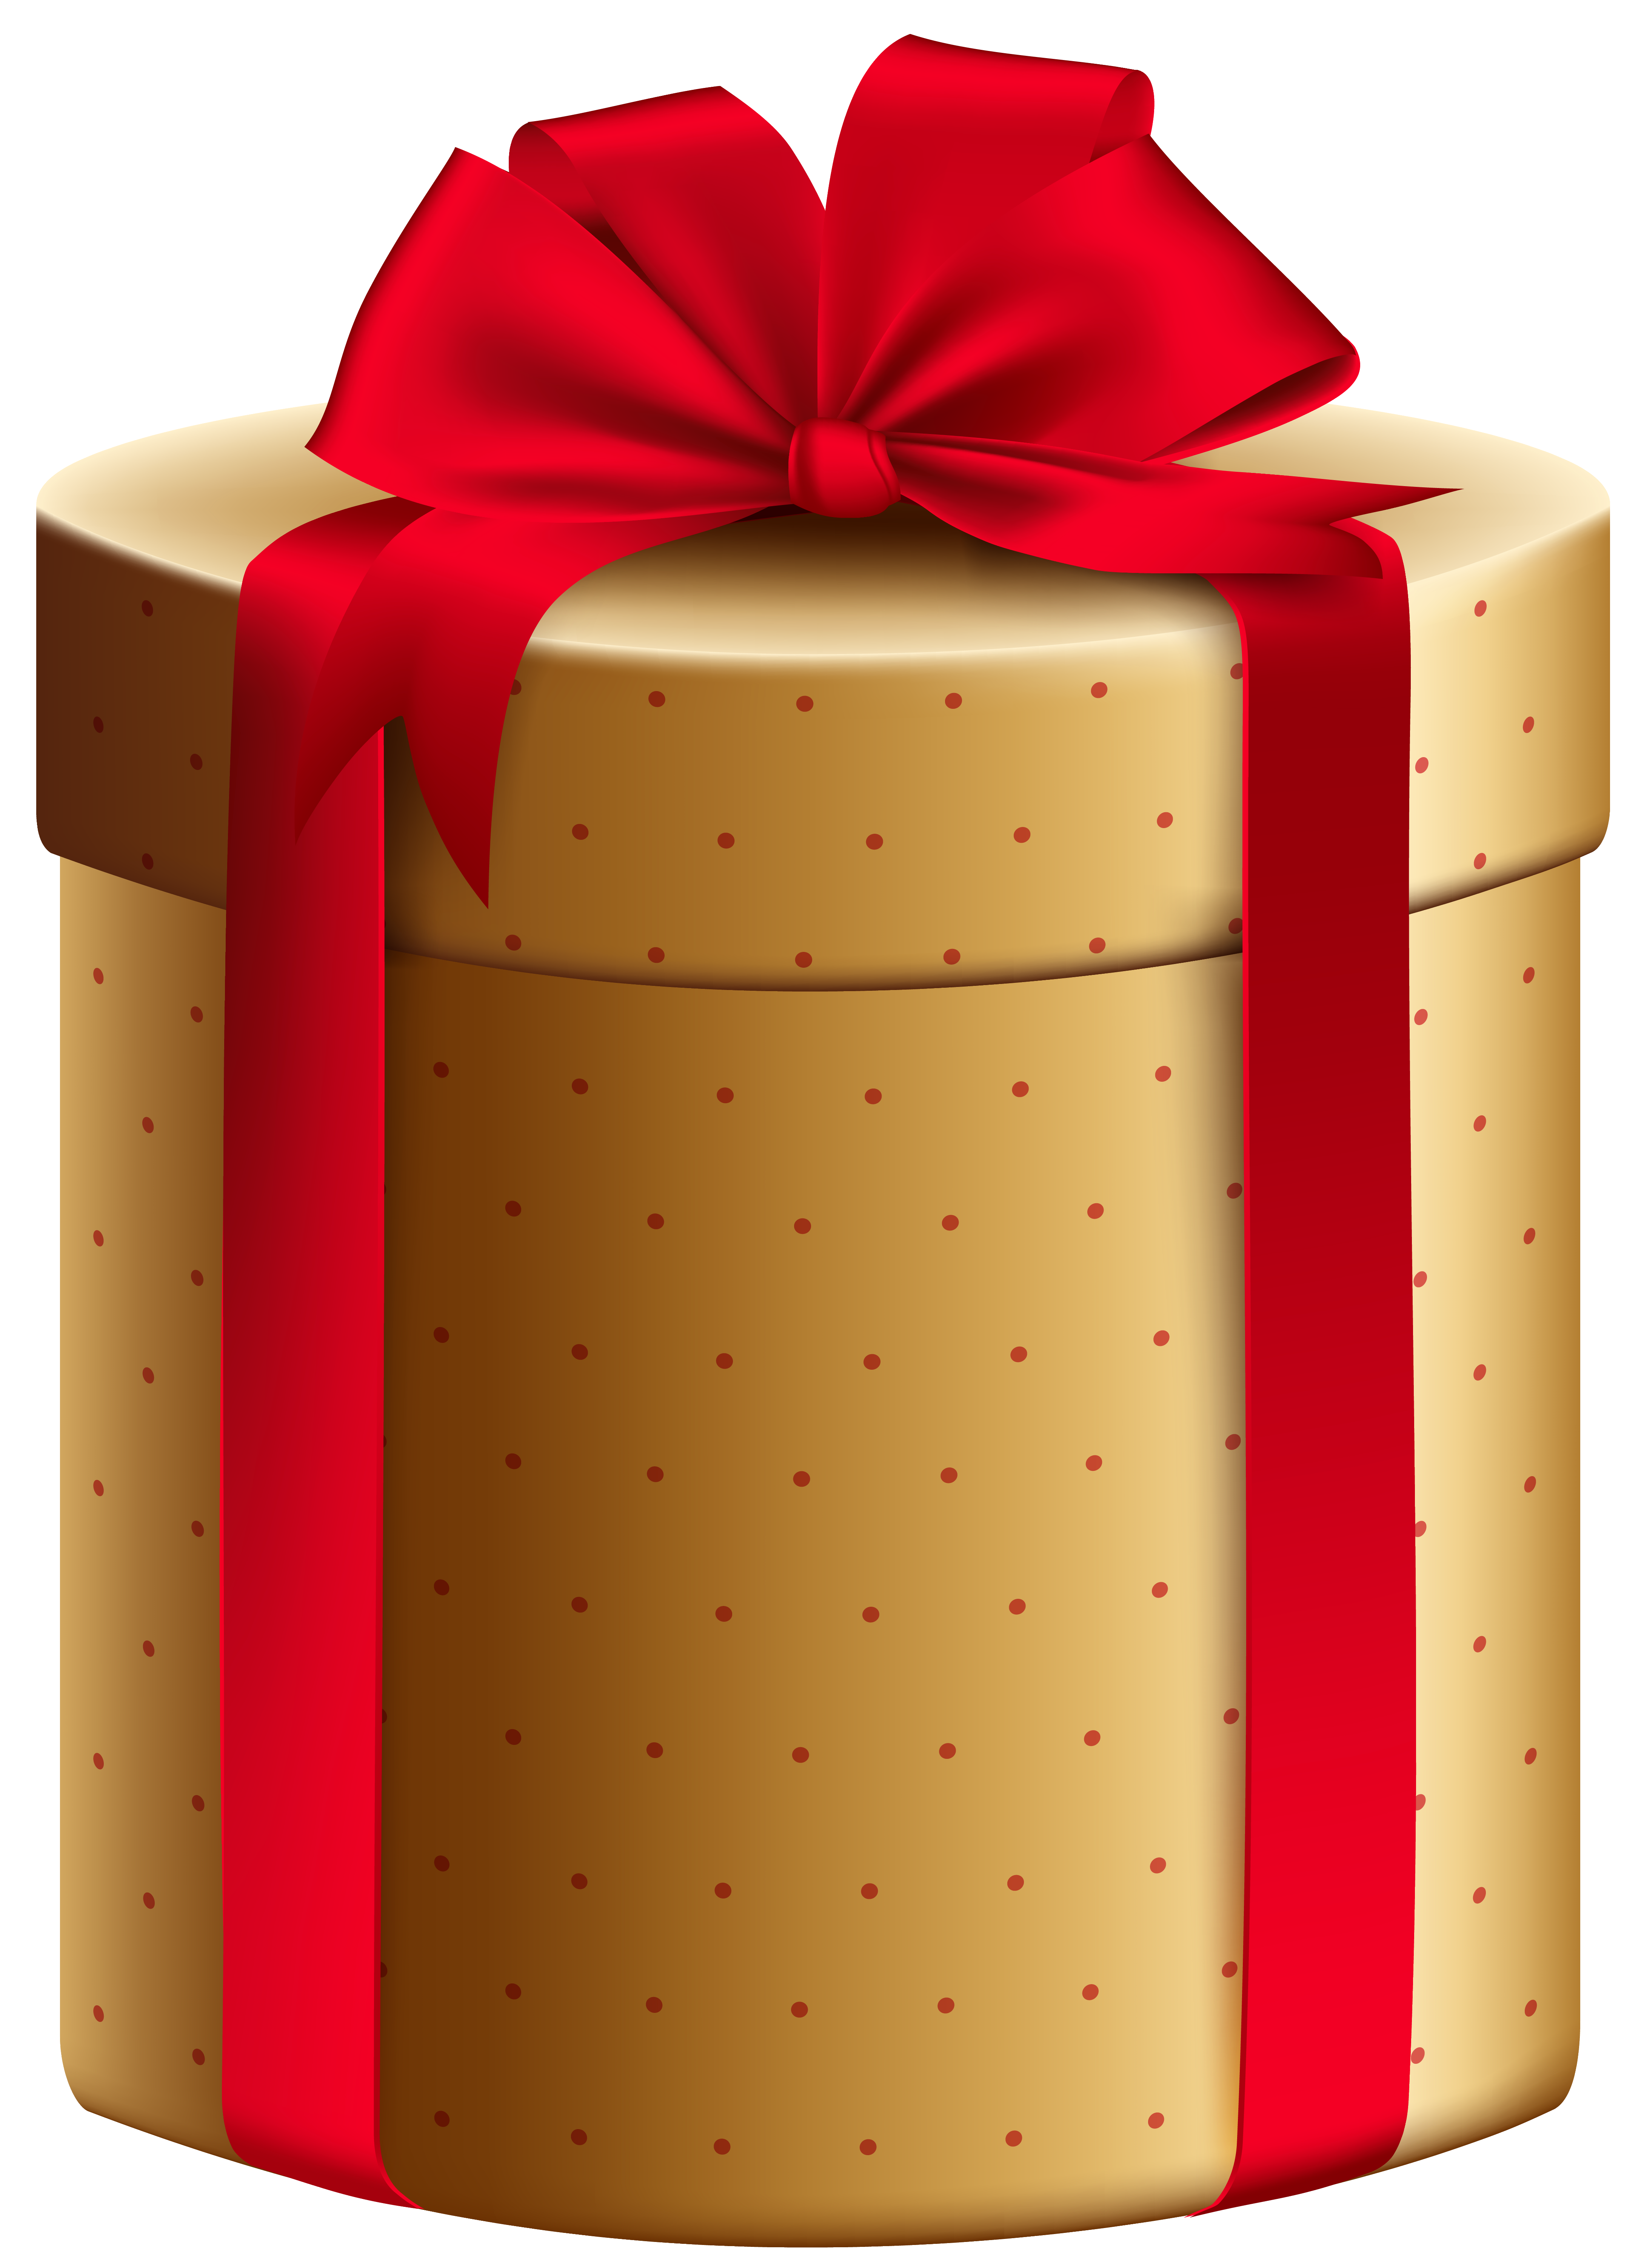 Gold Red Gift Box PNG Clipart Image